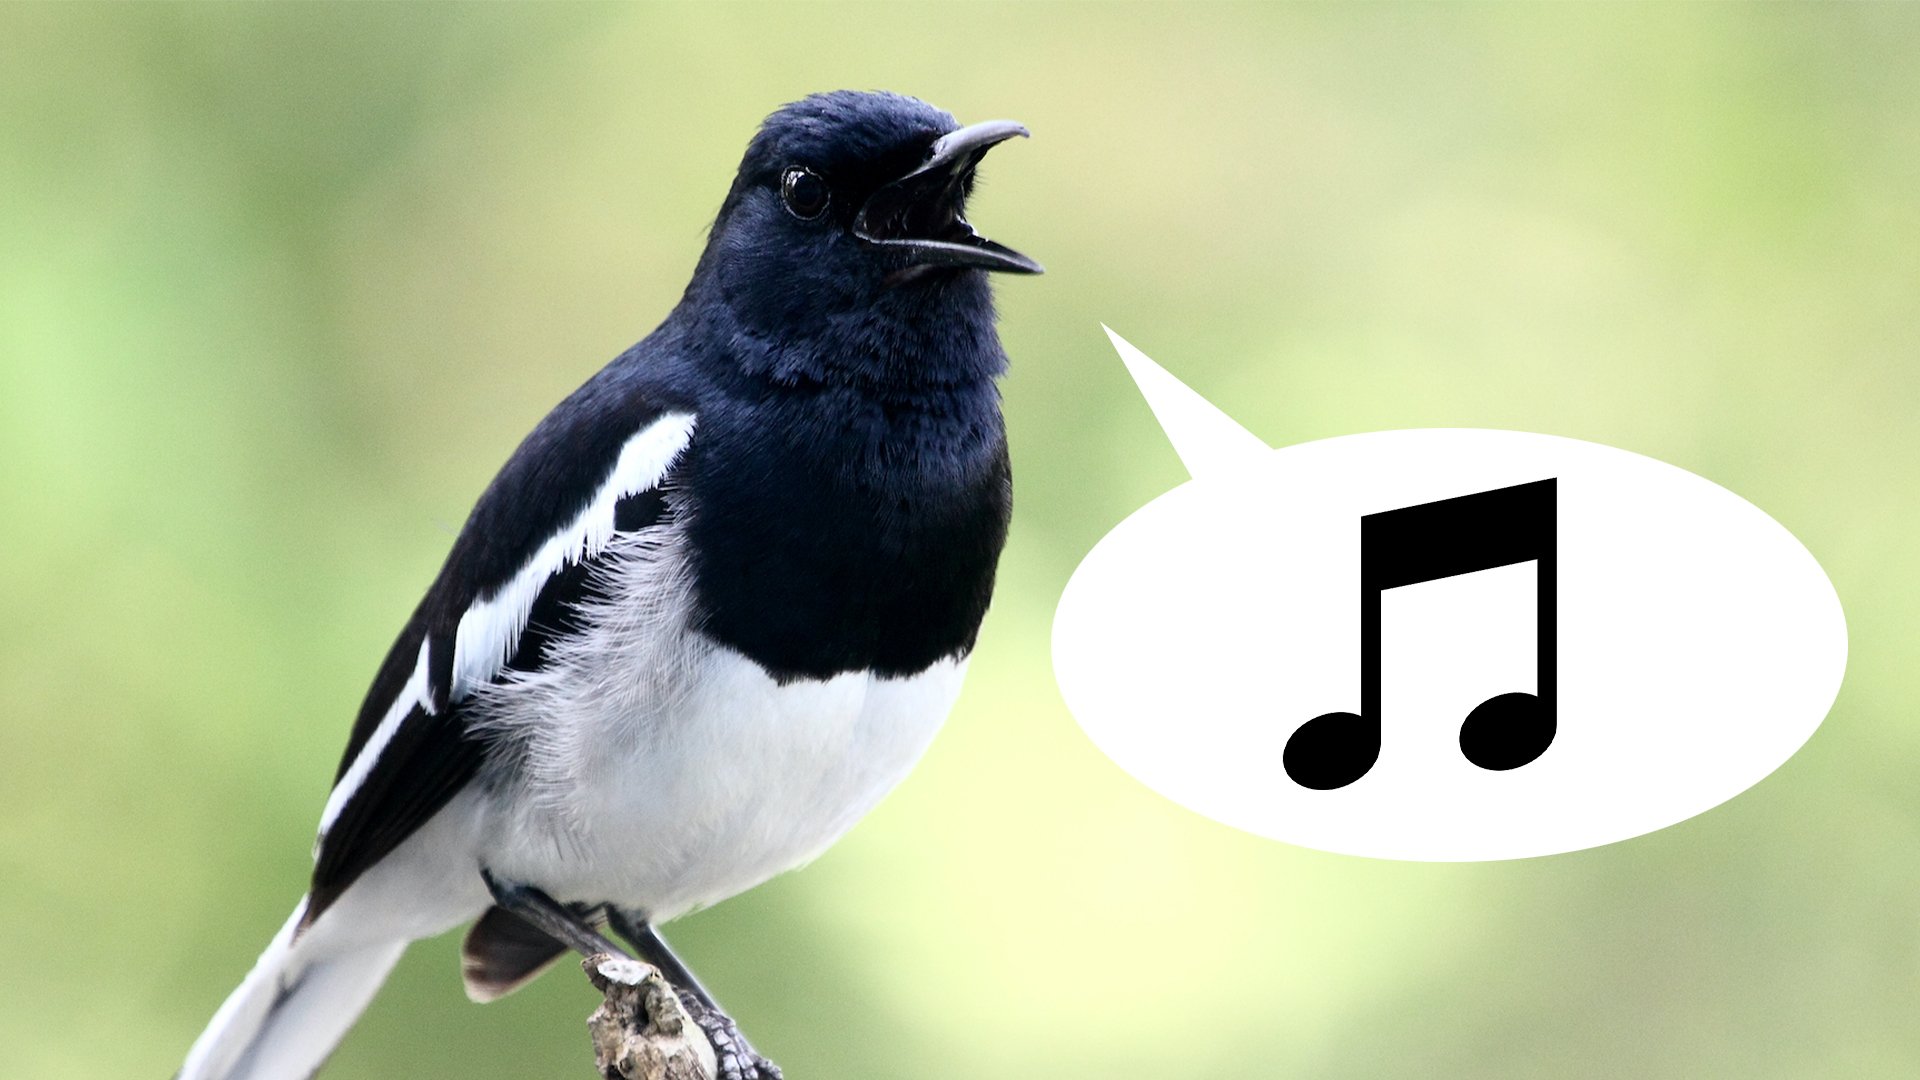 A magpie whistling a tune